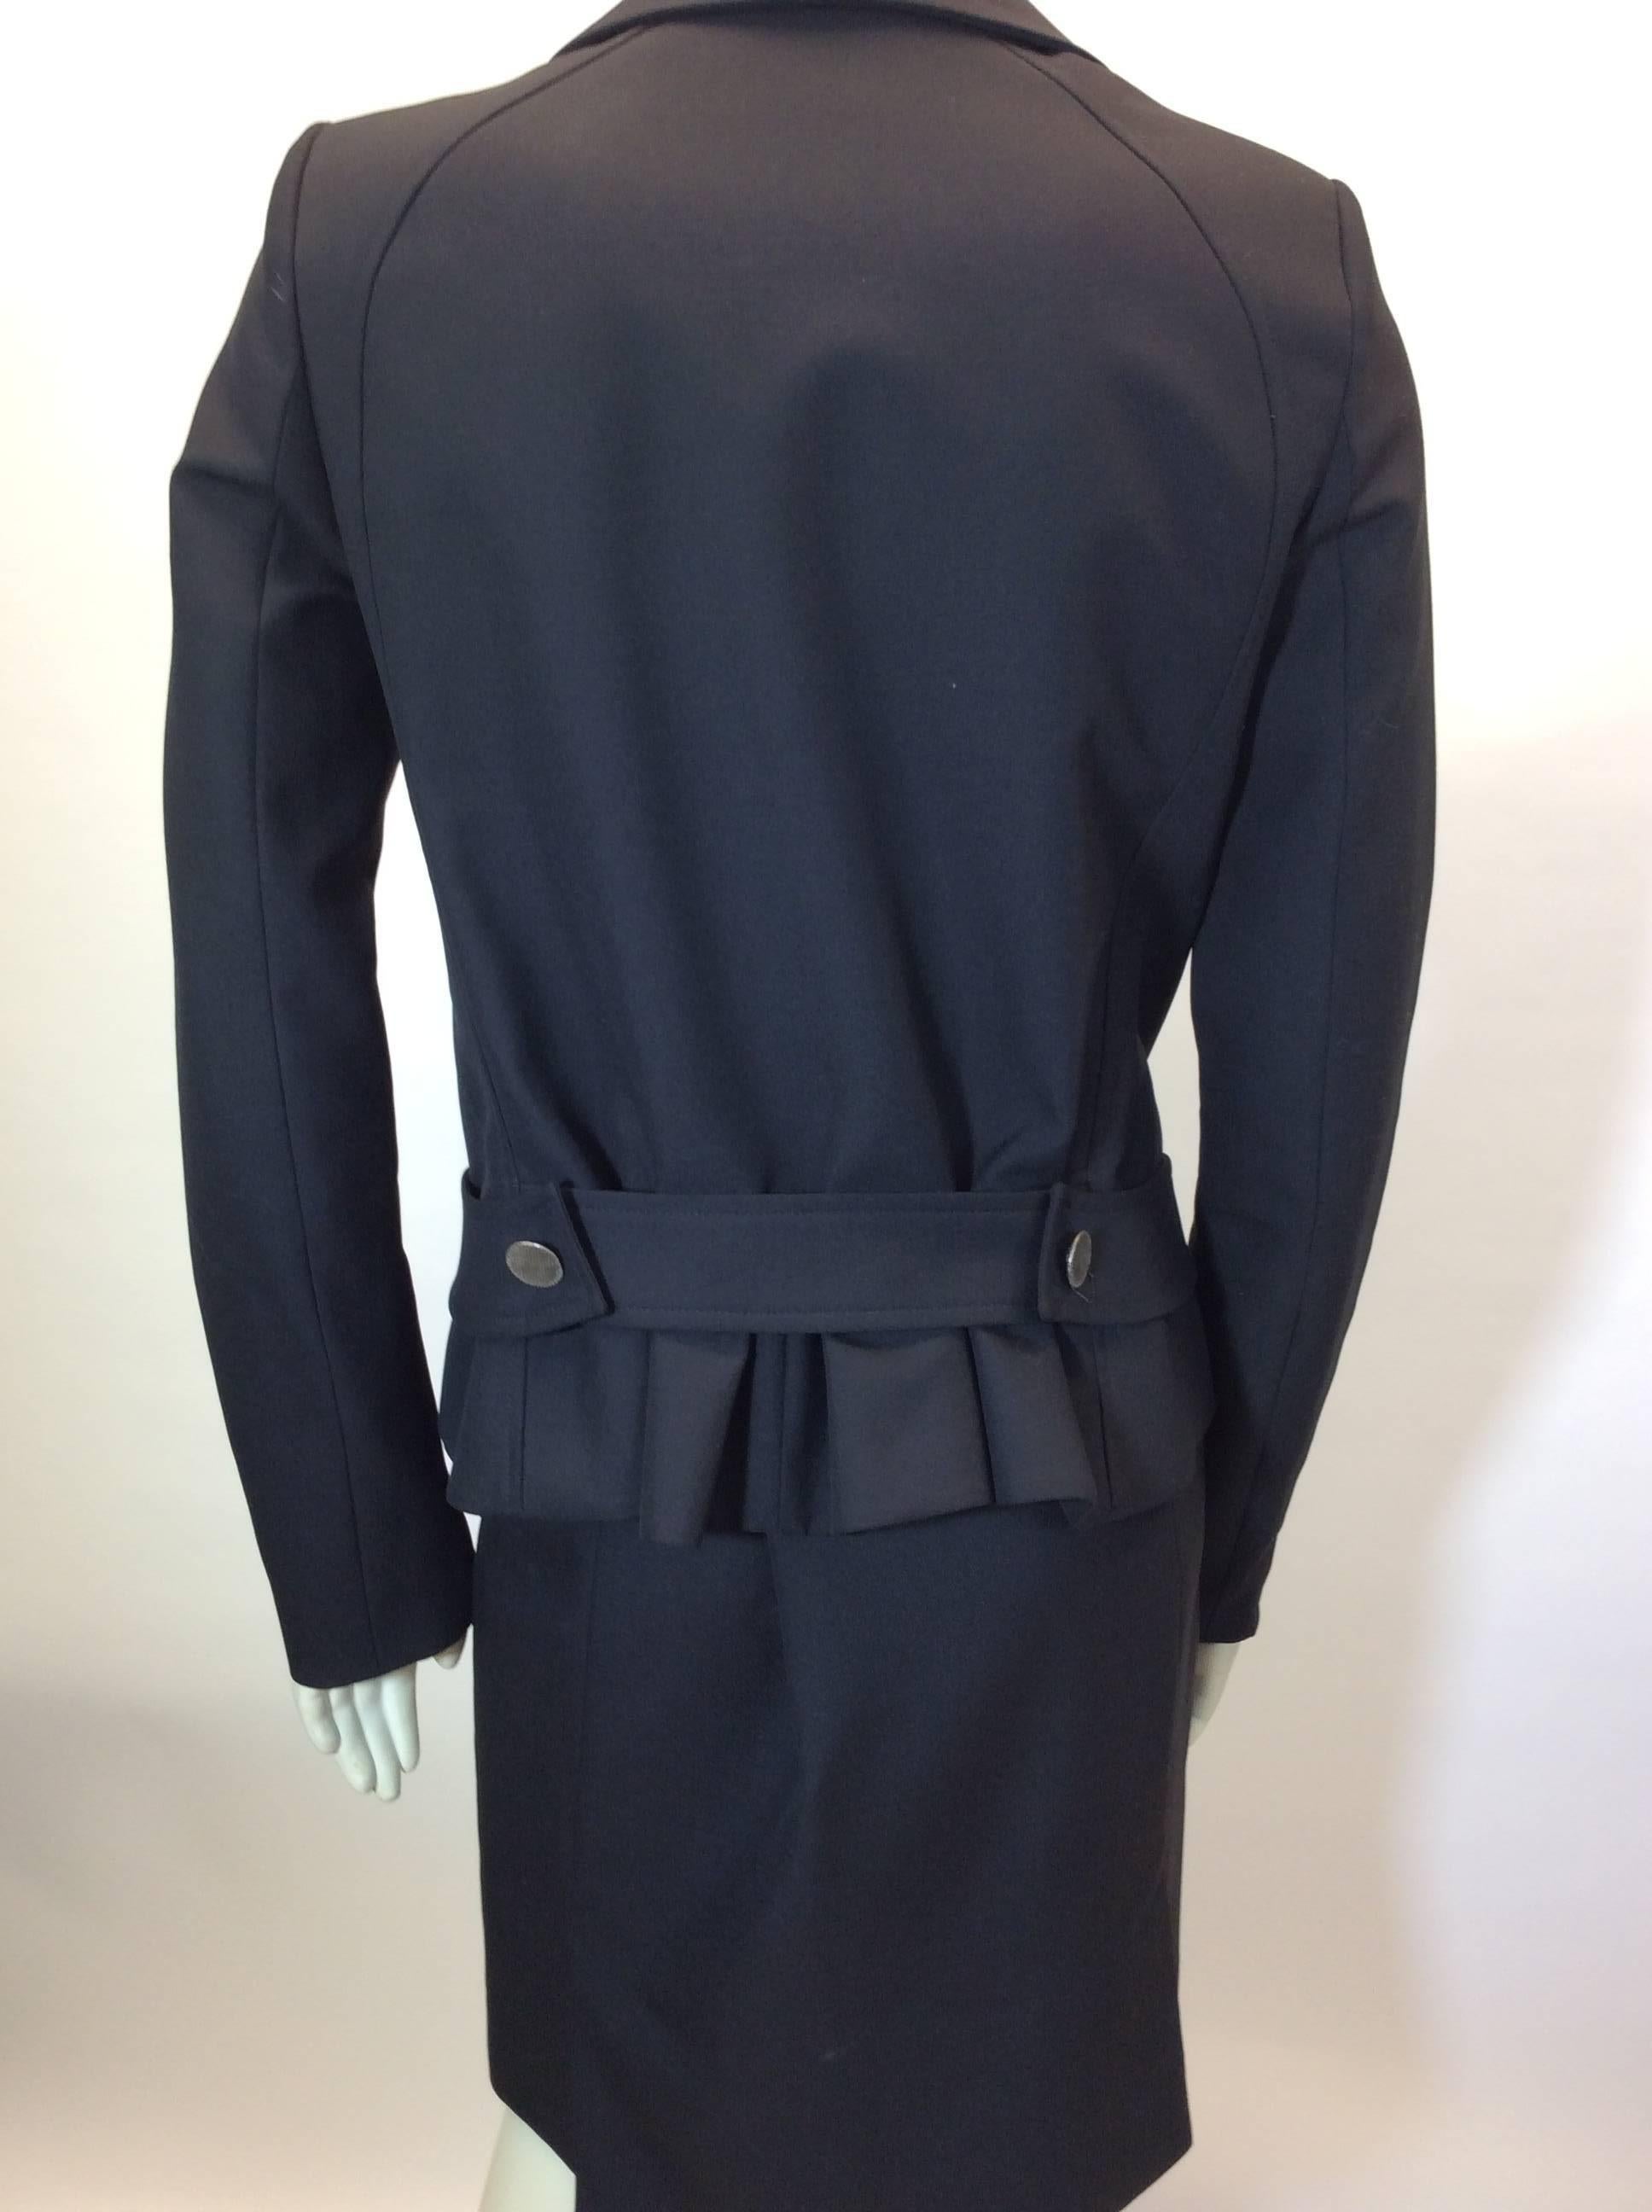 Balenciaga Black Skirt Suit with Peplum Detail In Excellent Condition For Sale In Narberth, PA